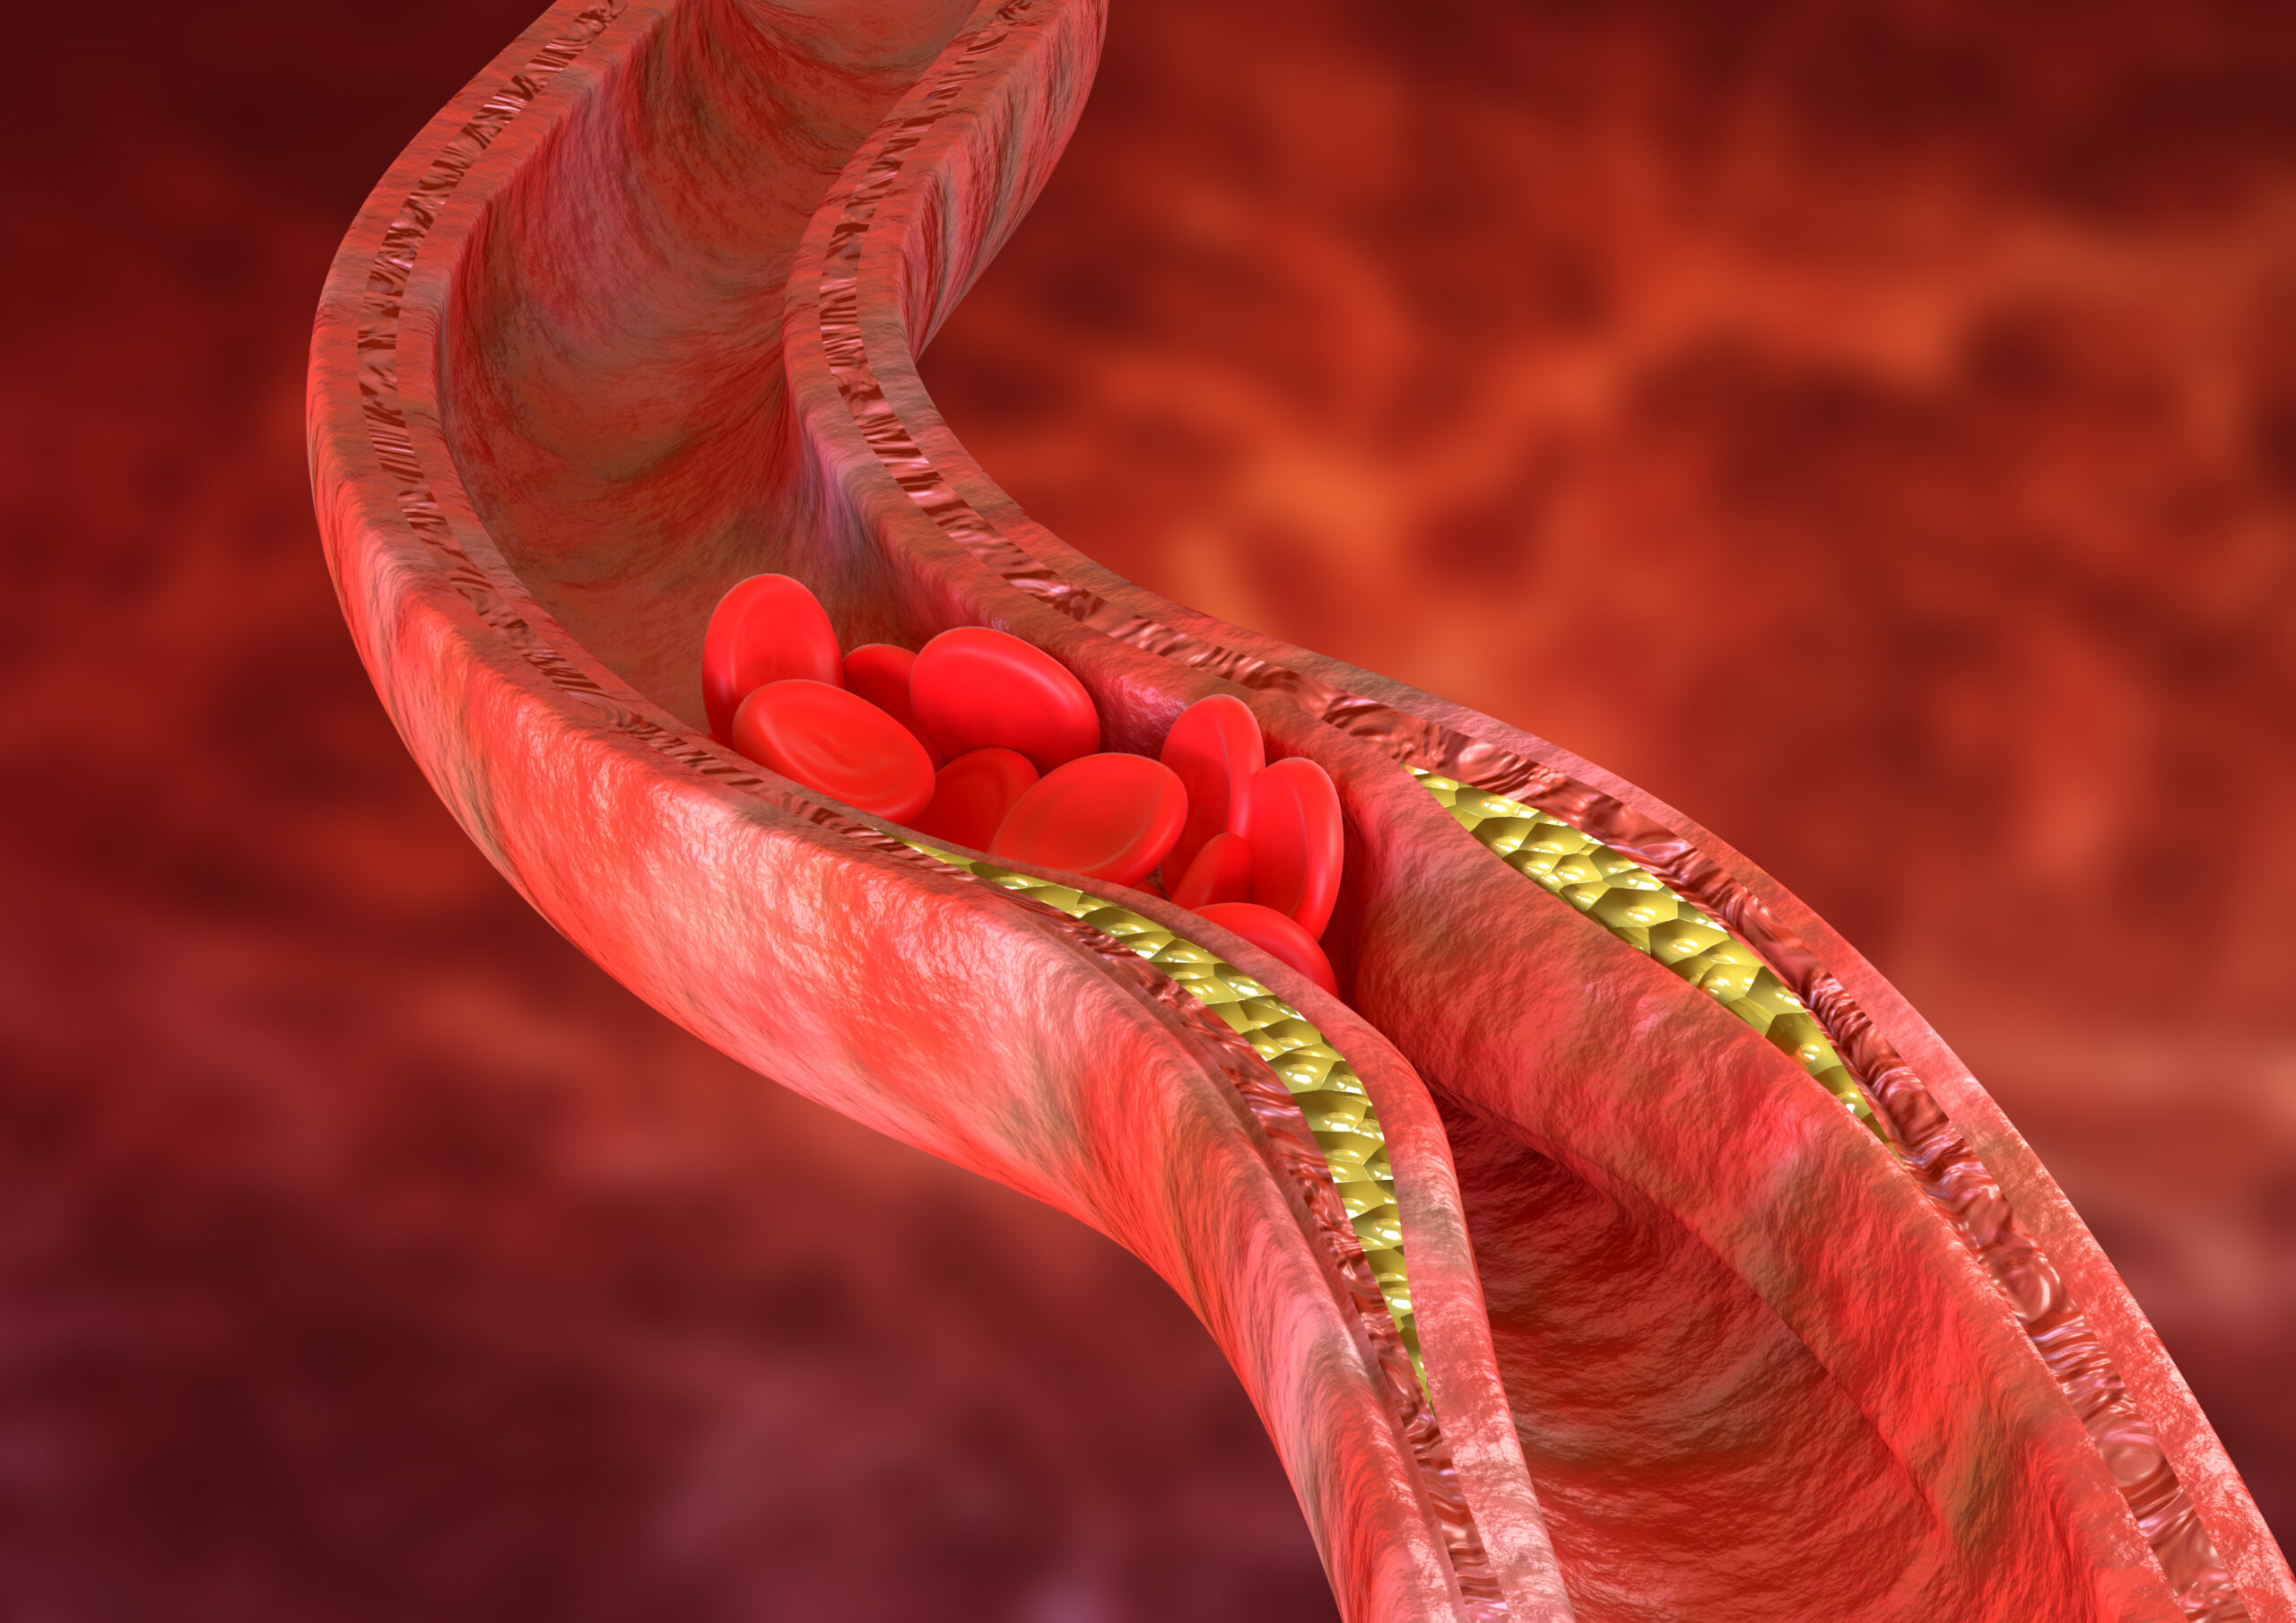 Atherosclerosis is an accumulation of cholesterol plaques in the walls of the arteries, which causes obstruction of blood flow.